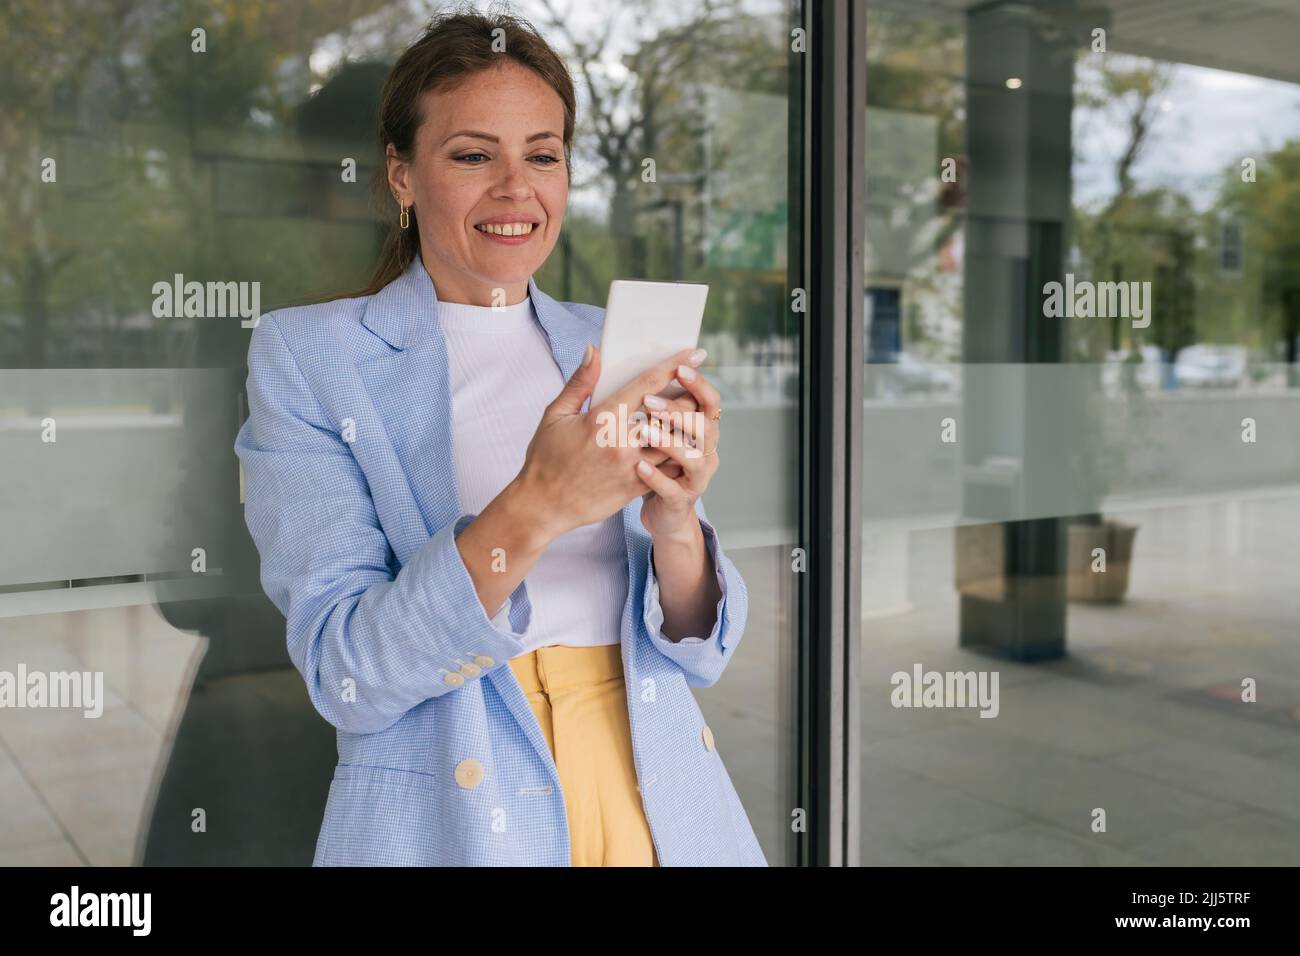 Smiling woman using phone leaning on glass window Stock Photo